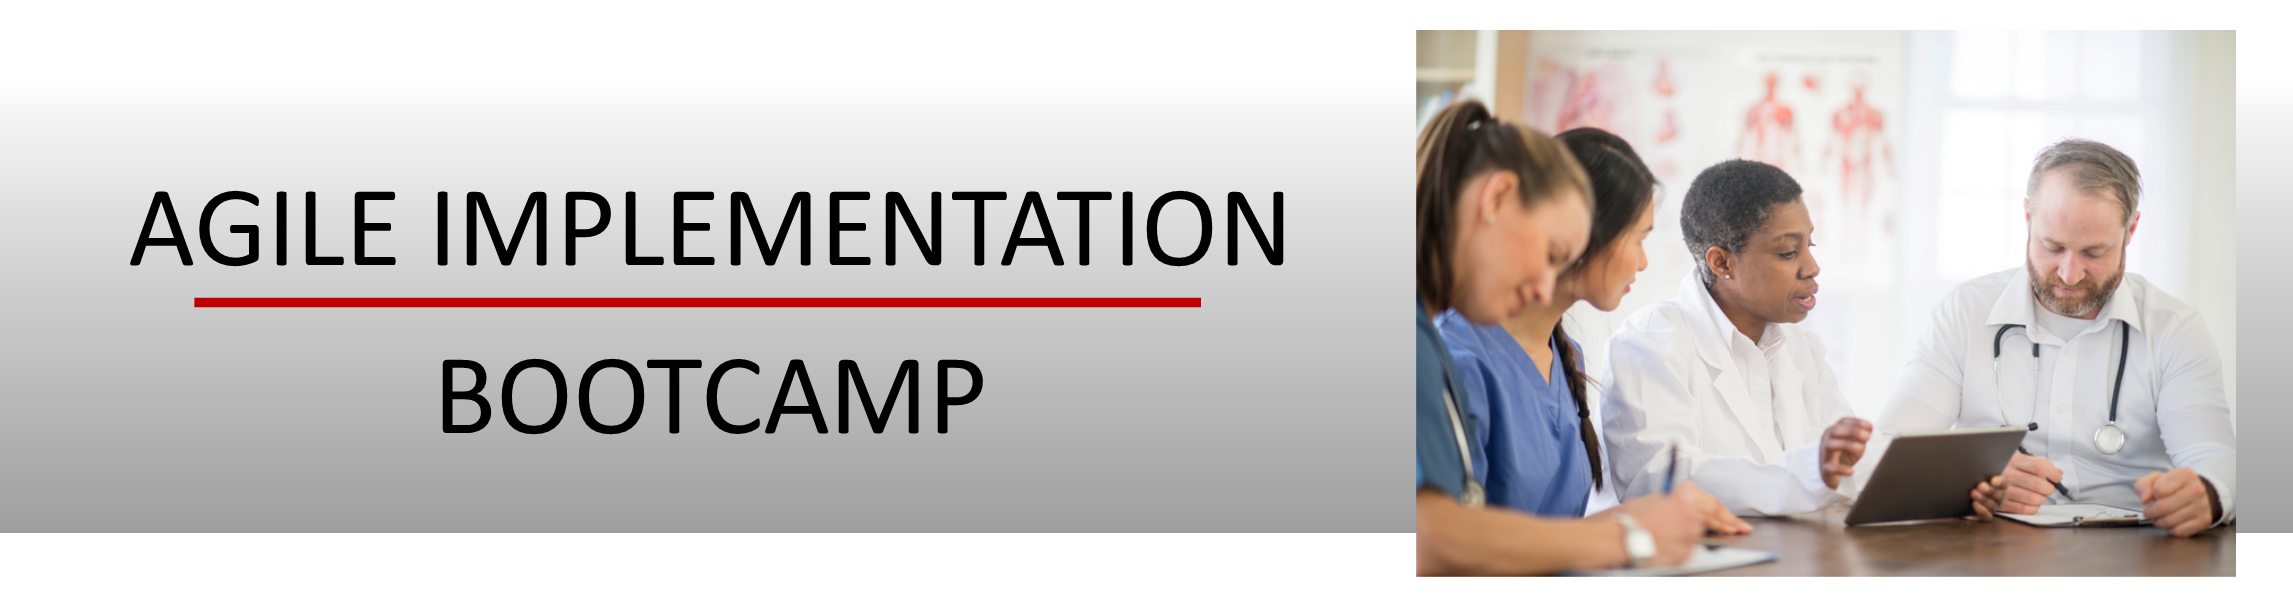 Agile Implementation Bootcamp	 Banner